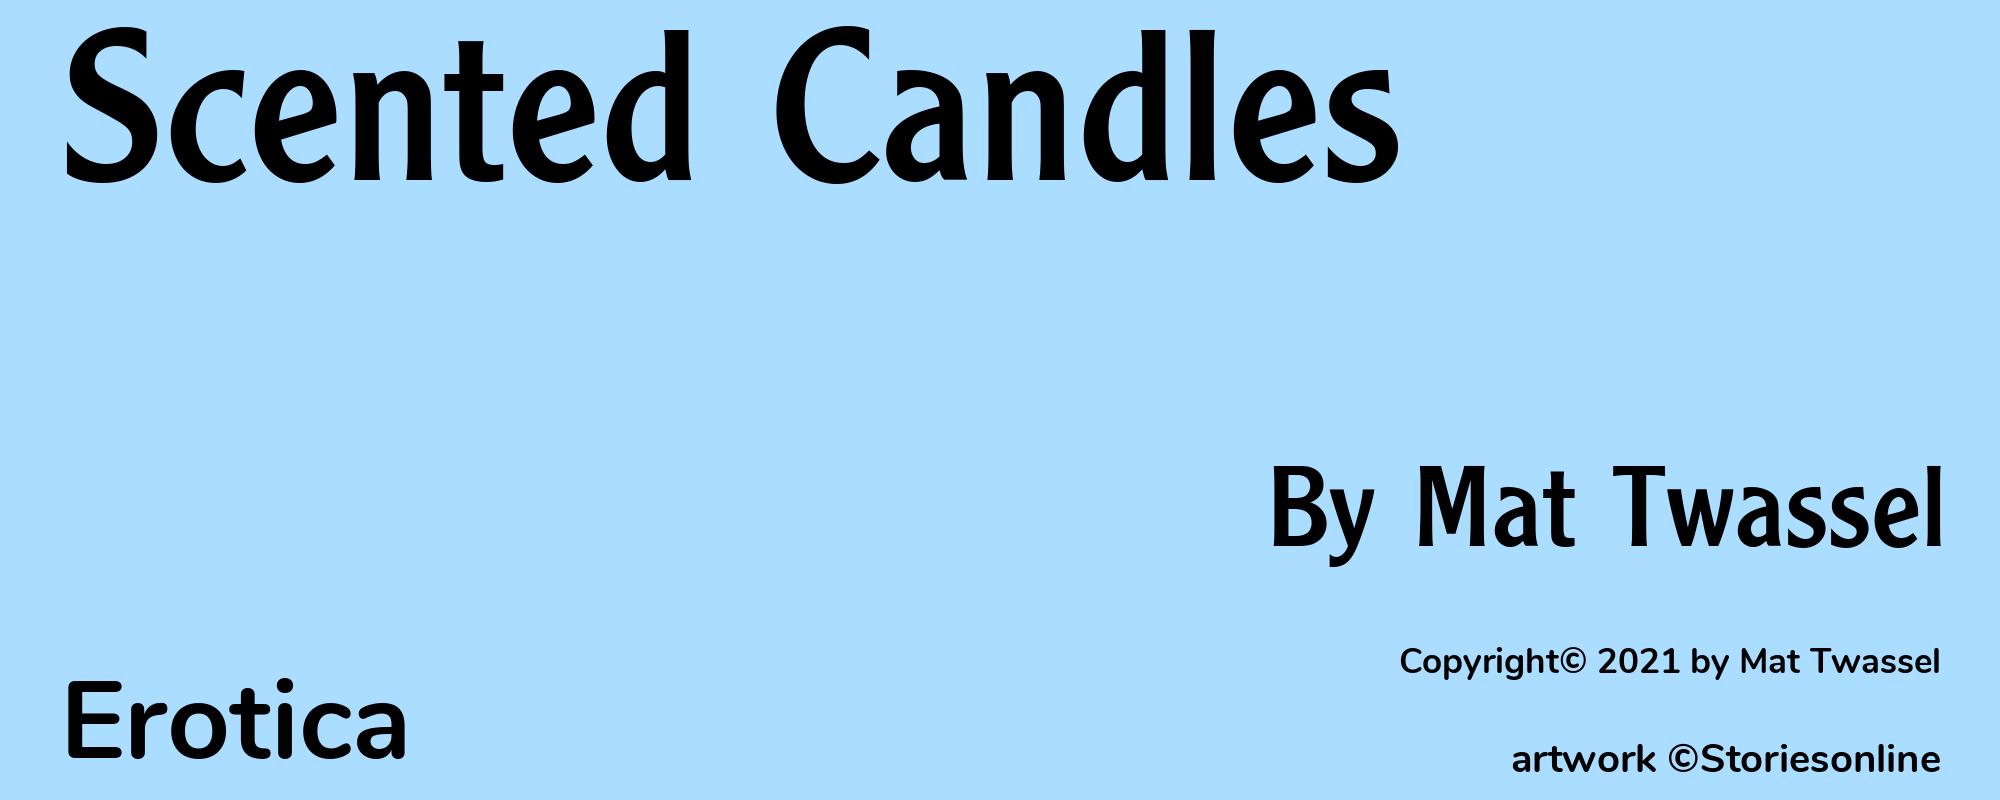 Scented Candles - Cover